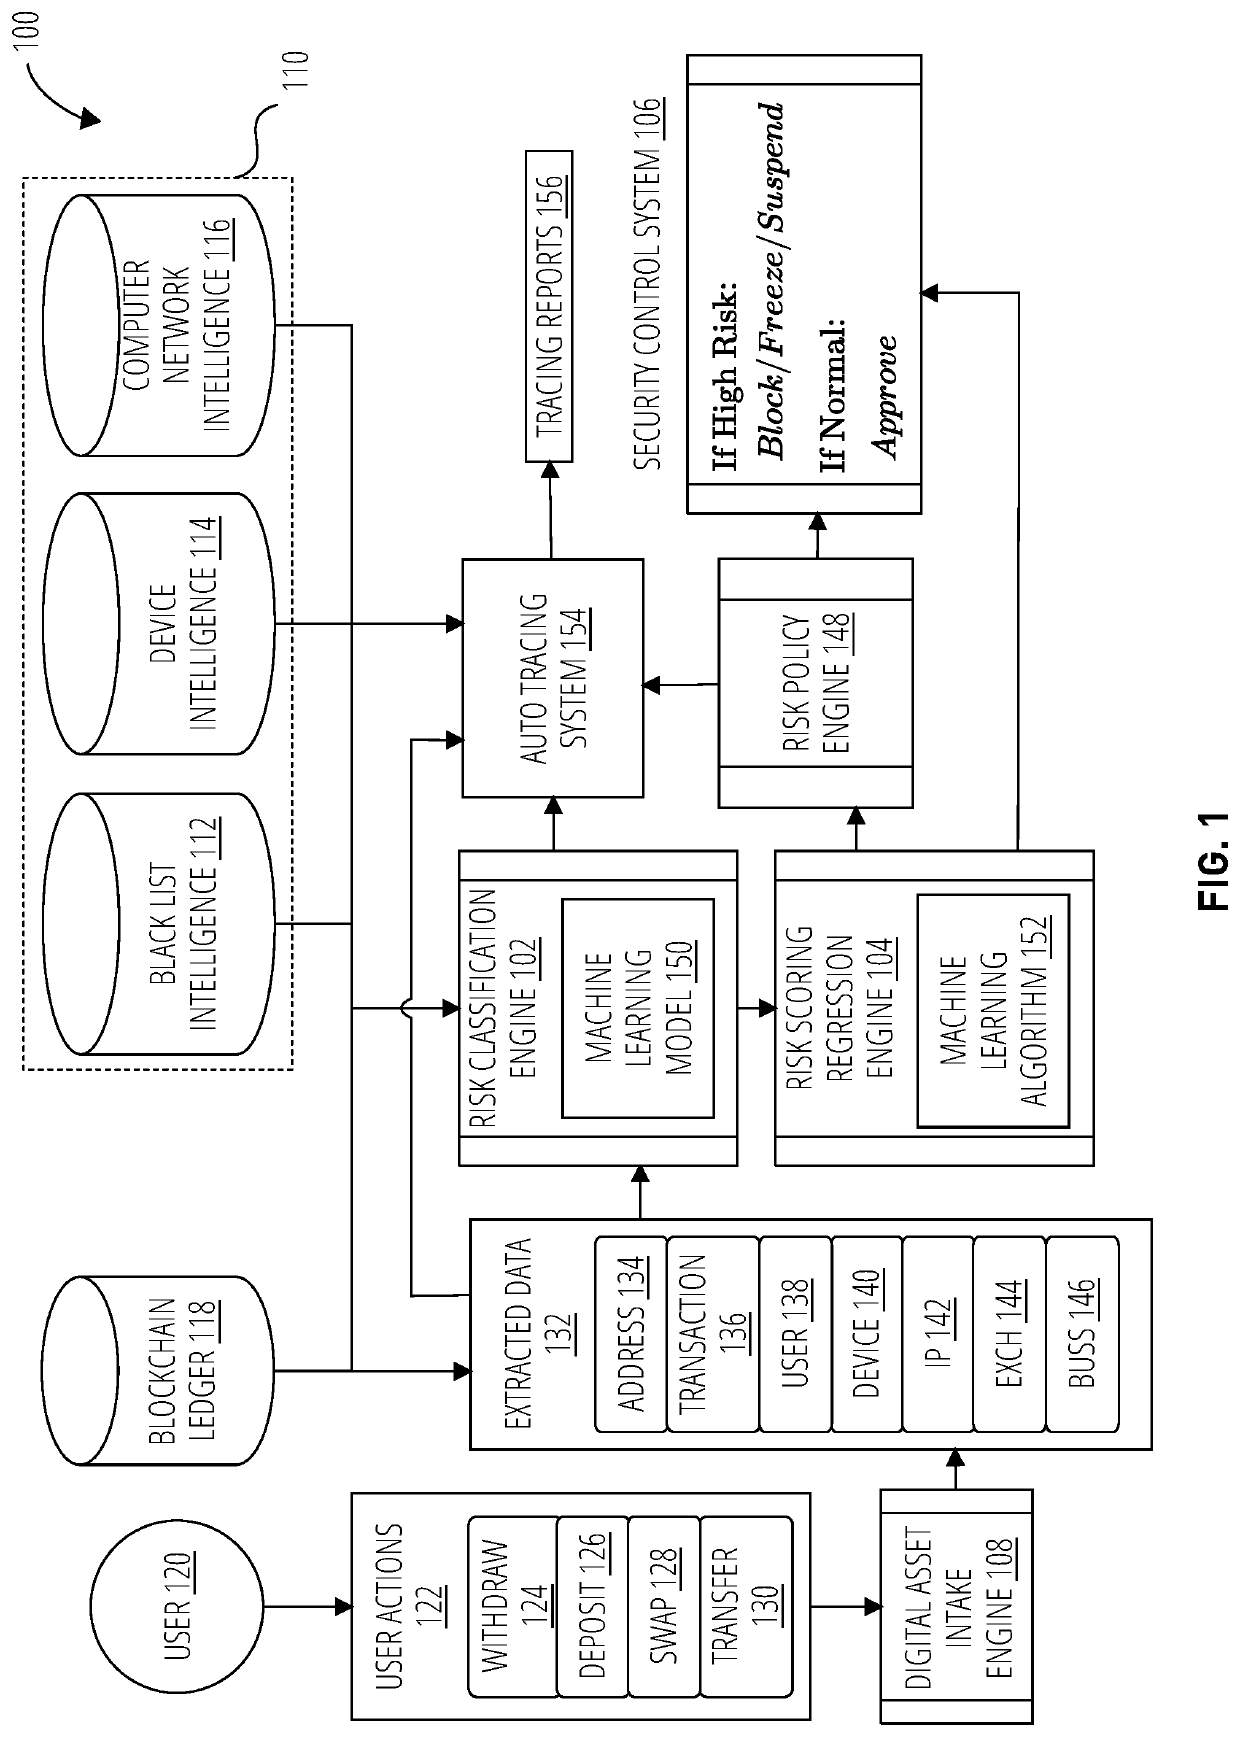 System and Method for Blockchain Automatic Tracing of Money Flow Using Artificial Intelligence